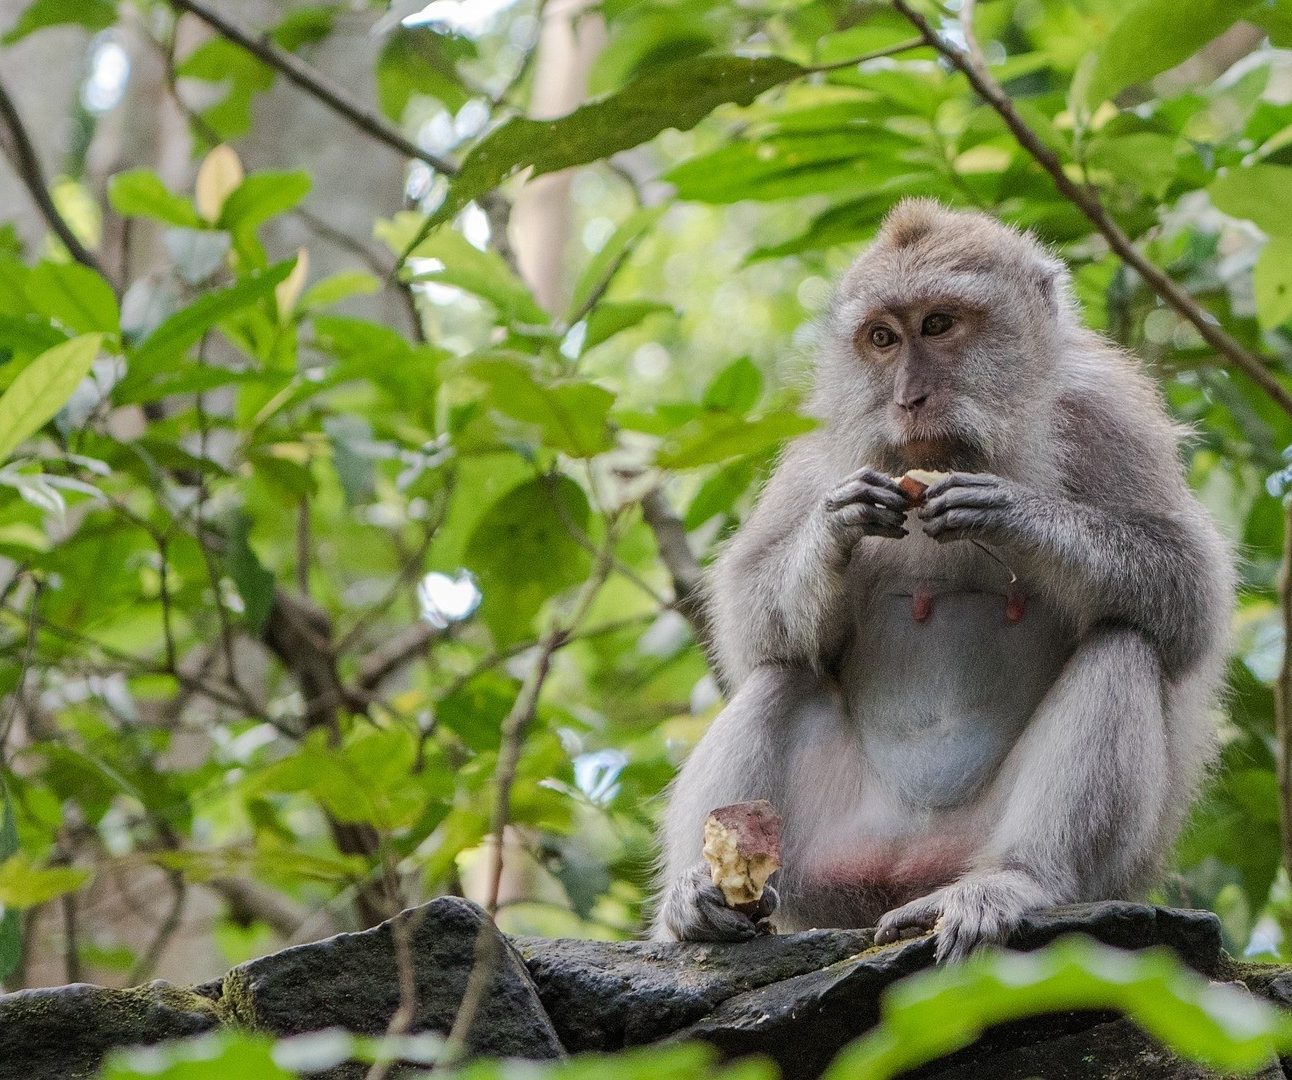 A macaque monkey sitting in a tree, eating fruit